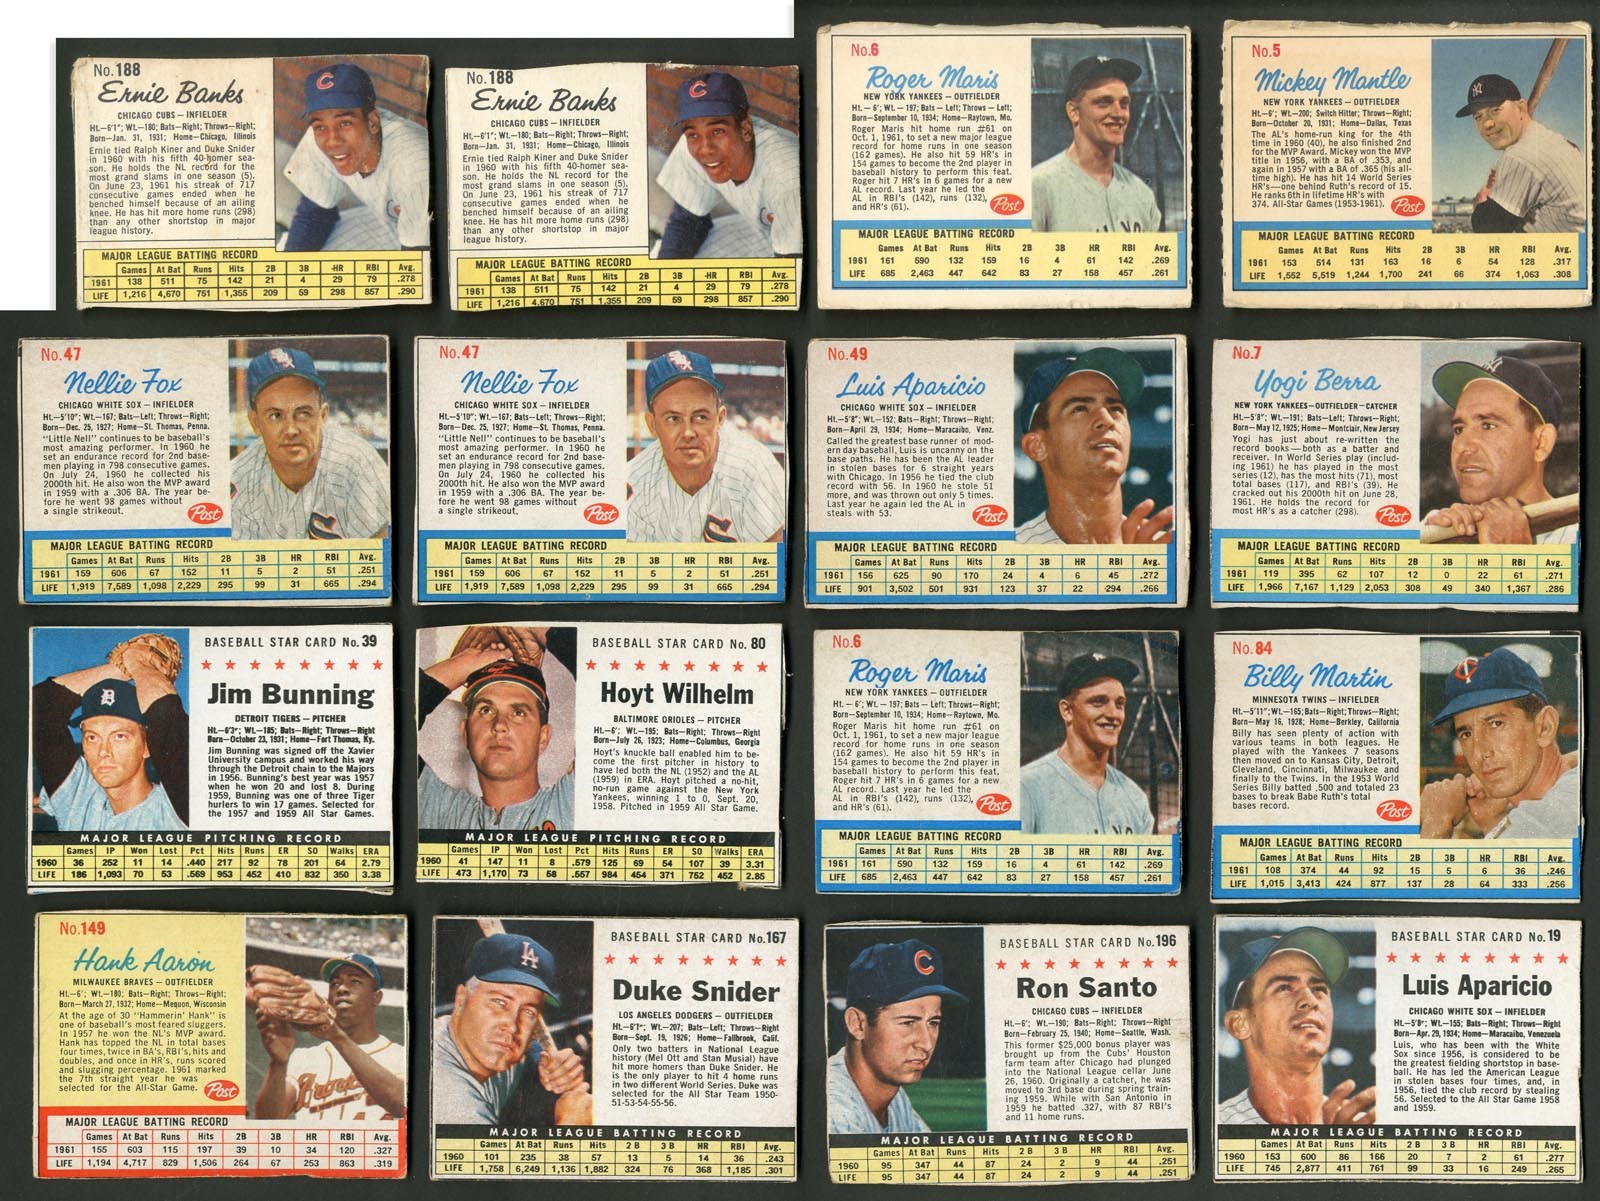 - 1961-63 Post Cereal Collection - Mantle (Ad Back), Clemente, Aaron, Maris (190+)